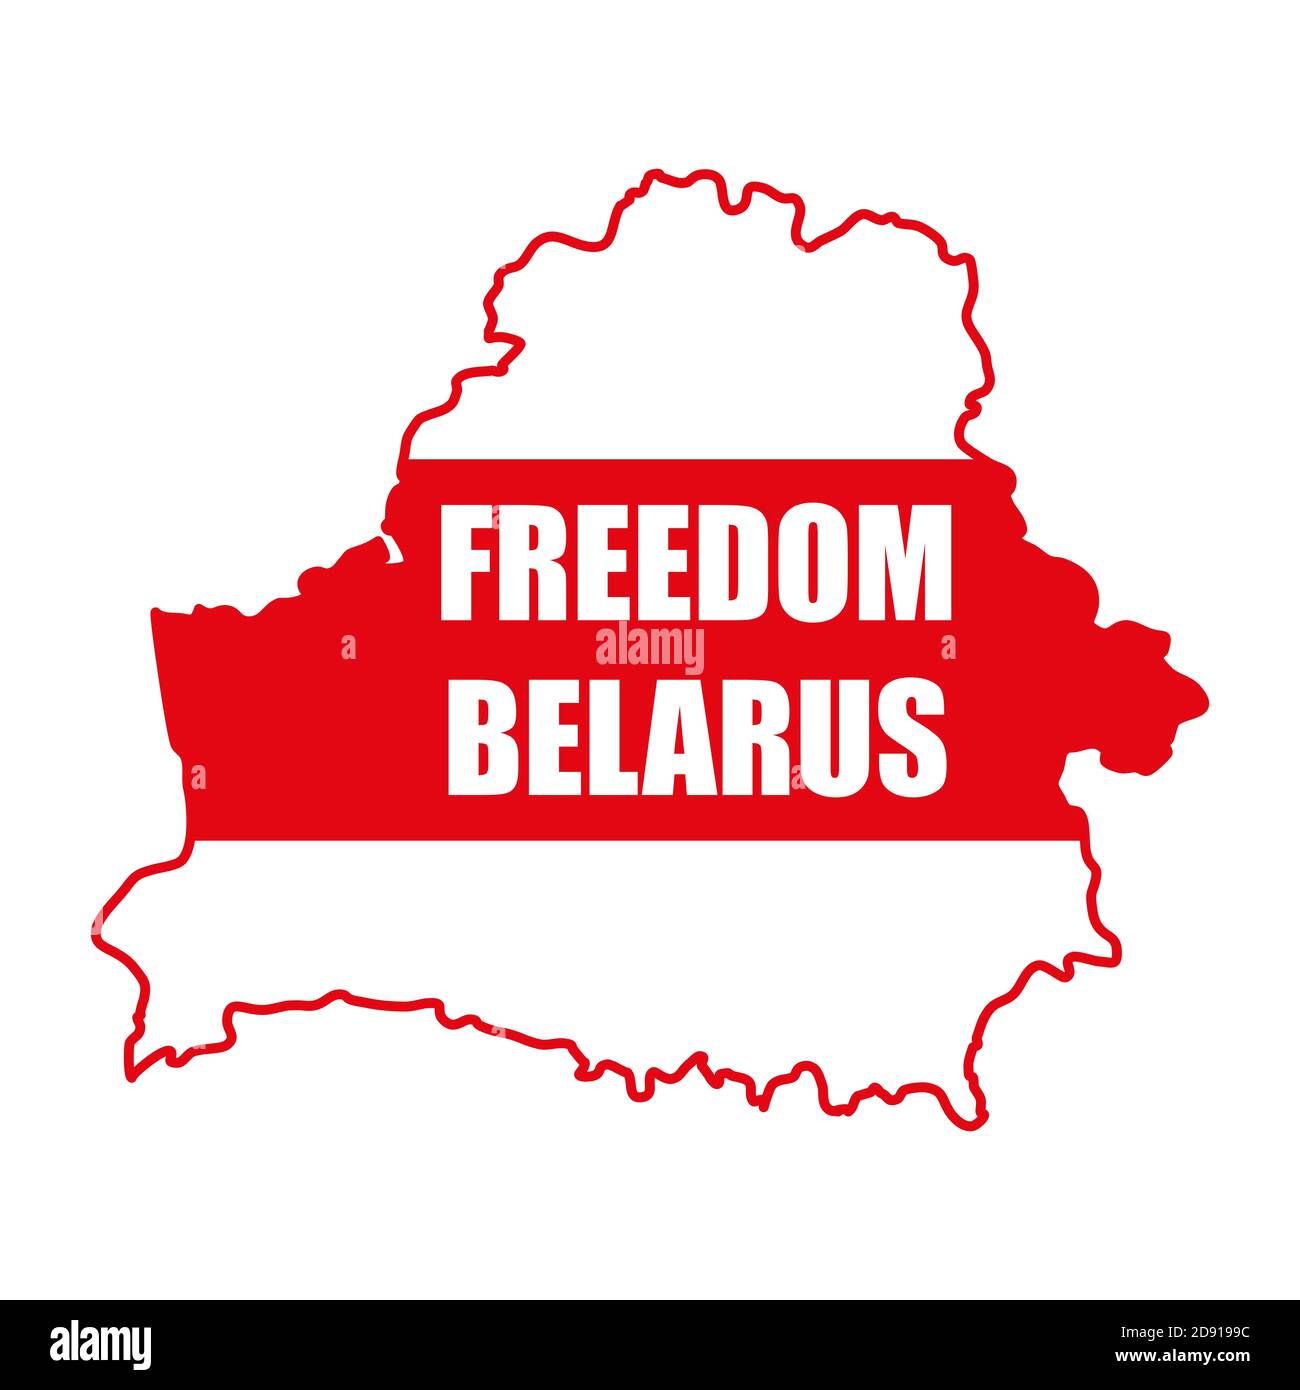 Freedom Belarus against the background of the white-red-white flag. The symbol of freedom Belarus. National colors of Belarus - Country silhouette Stock Vector